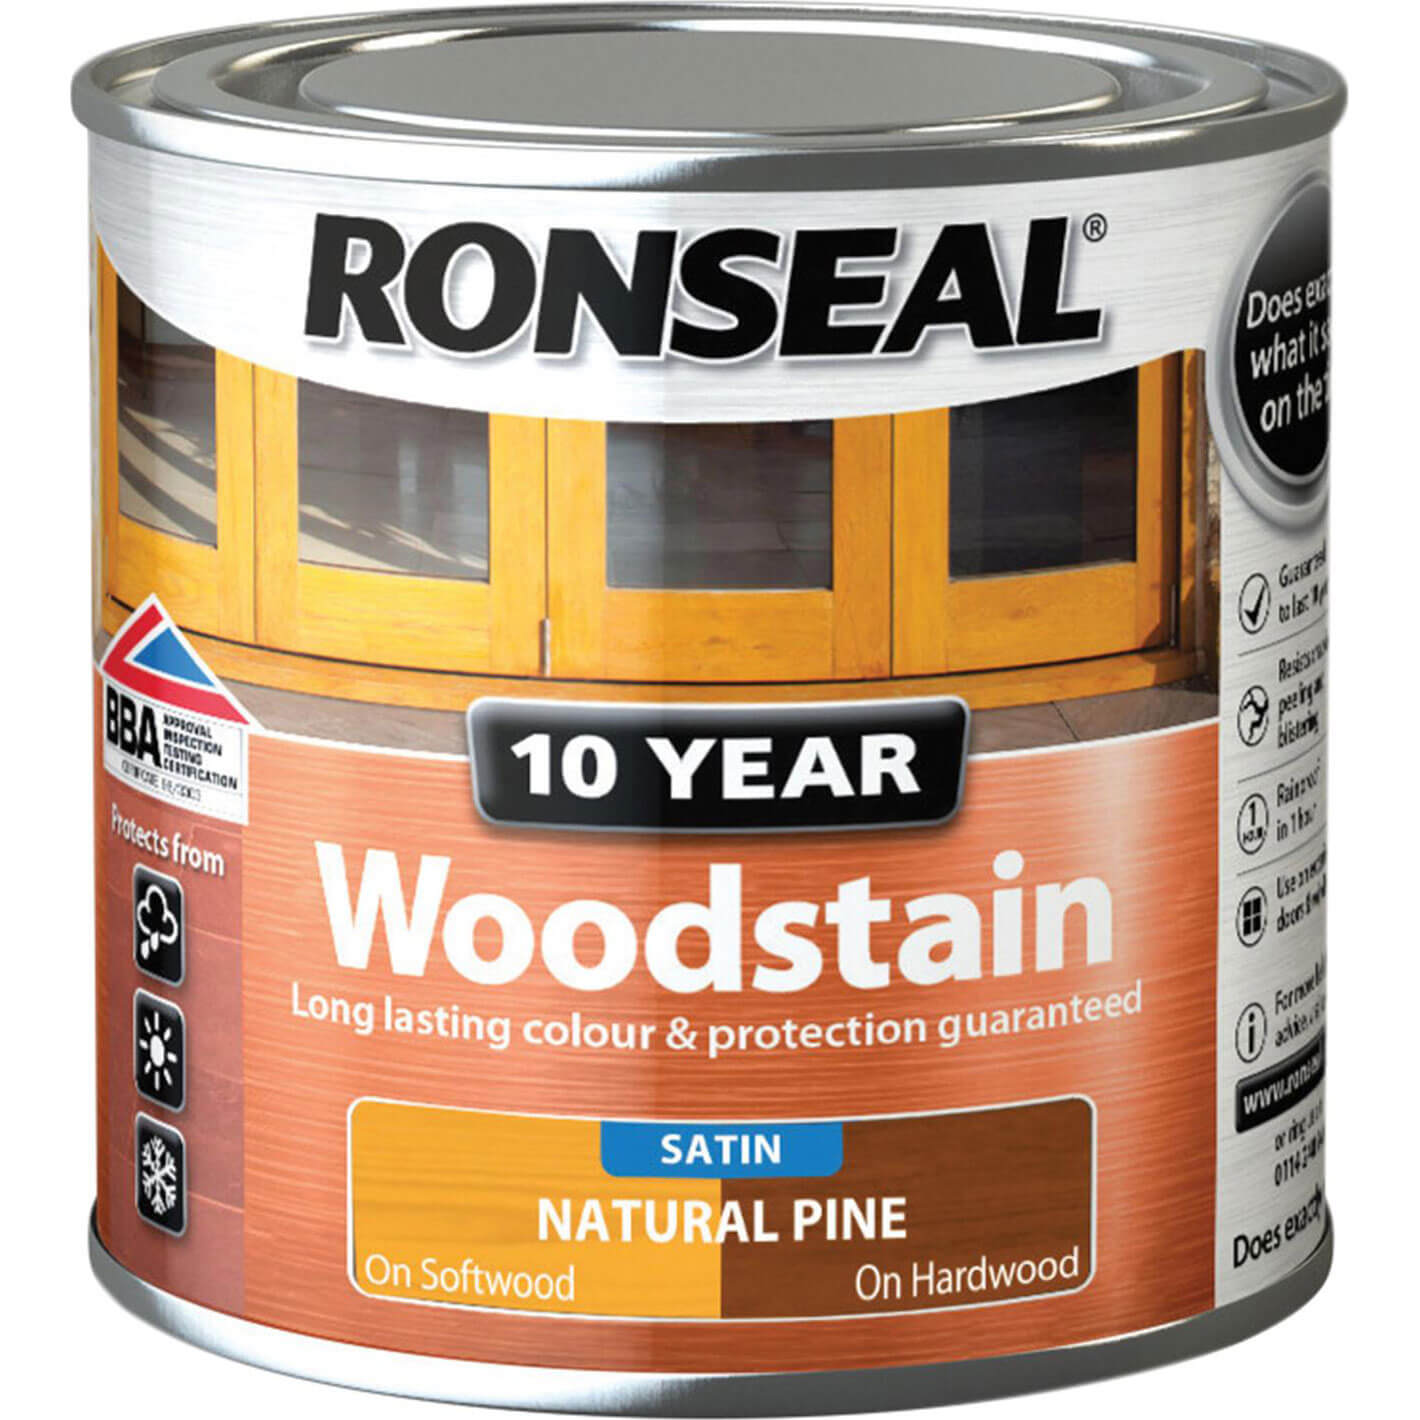 Ronseal 10 Year Wood Stain Natural Pine 250ml